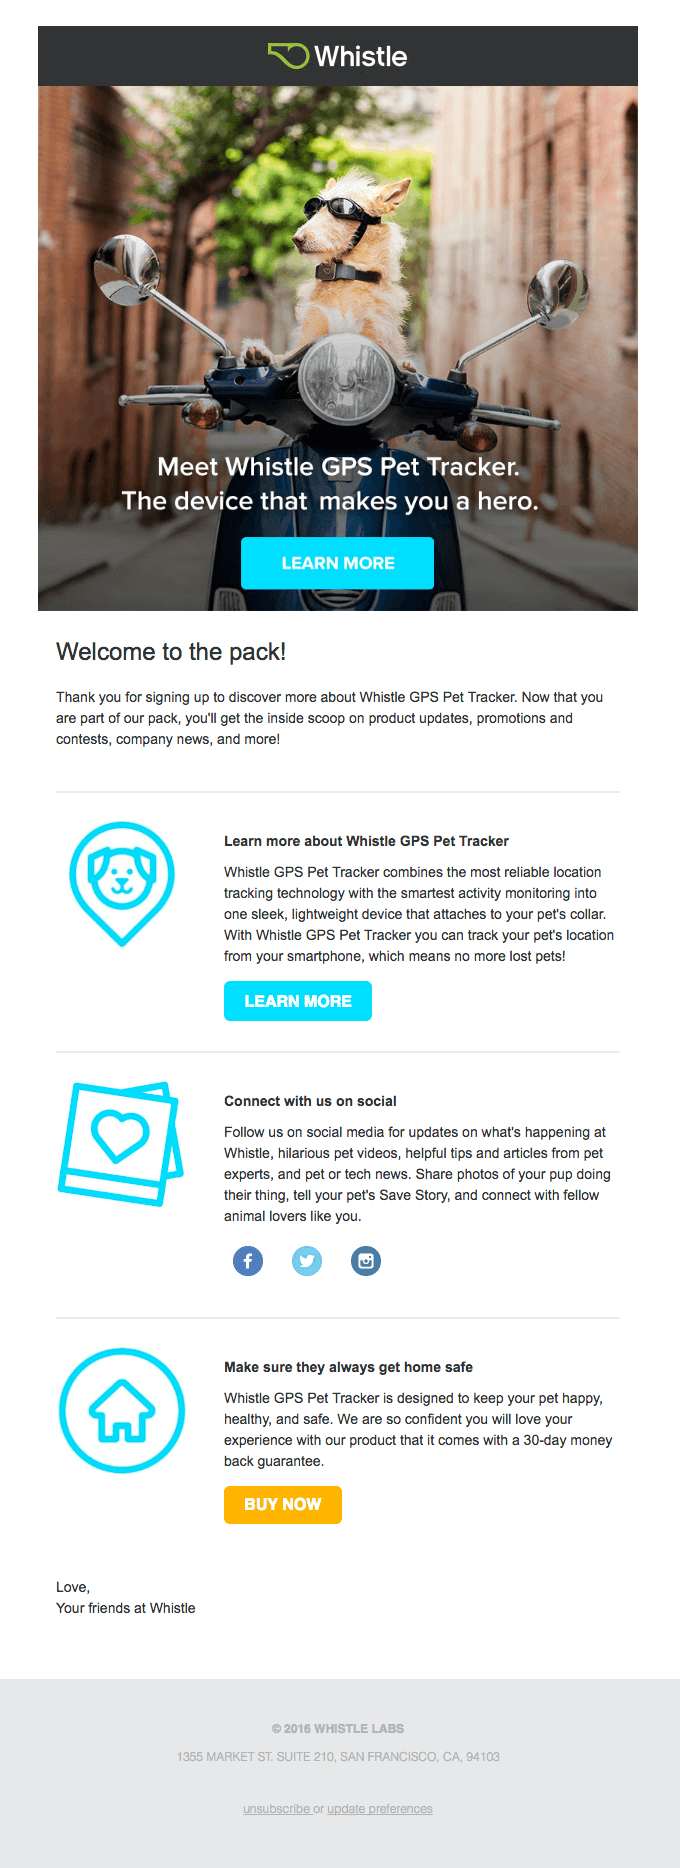 Welcome to the pack! Thanks for signing up to learn more. - Really Good Emails